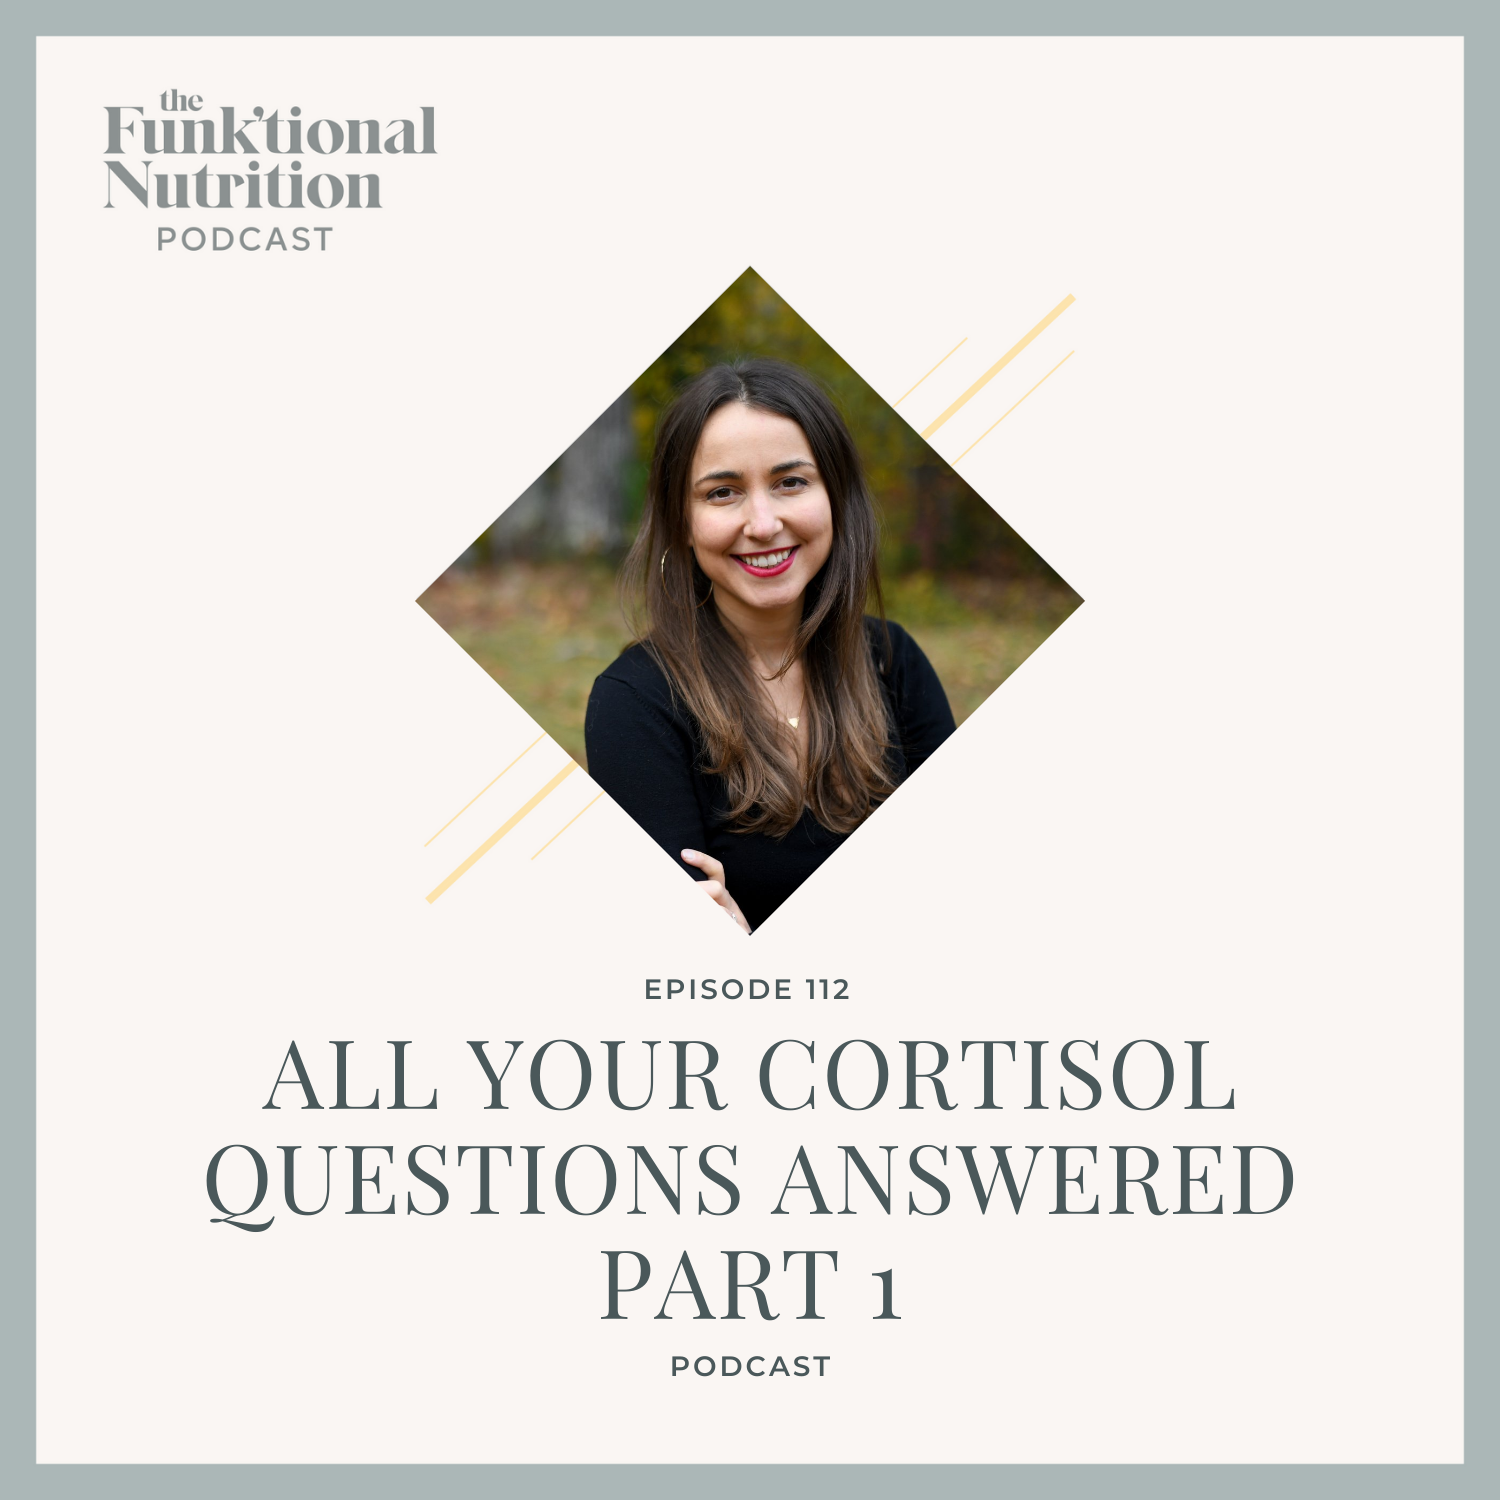 Episode-112-All-Your-Cortisol-Questions-Answered-Part-1-The-Funk_tional-Nutrition-Podcast.png